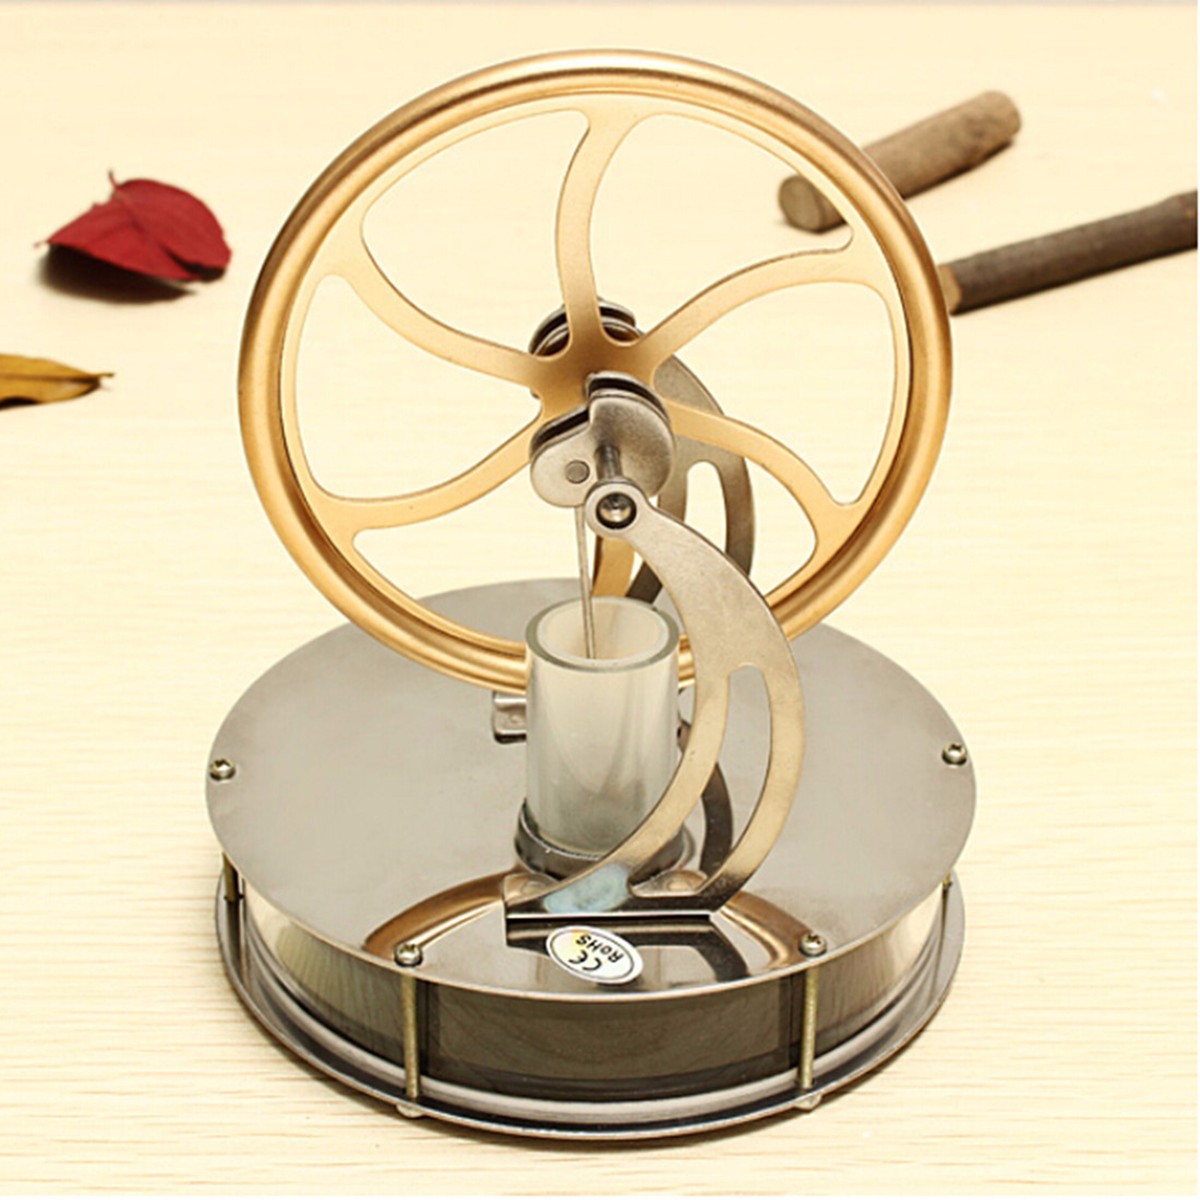 Low-Temperature-Stirling-Engine-Motor-Temperature-Difference-Cool-Model-Educational-Toy-1164414